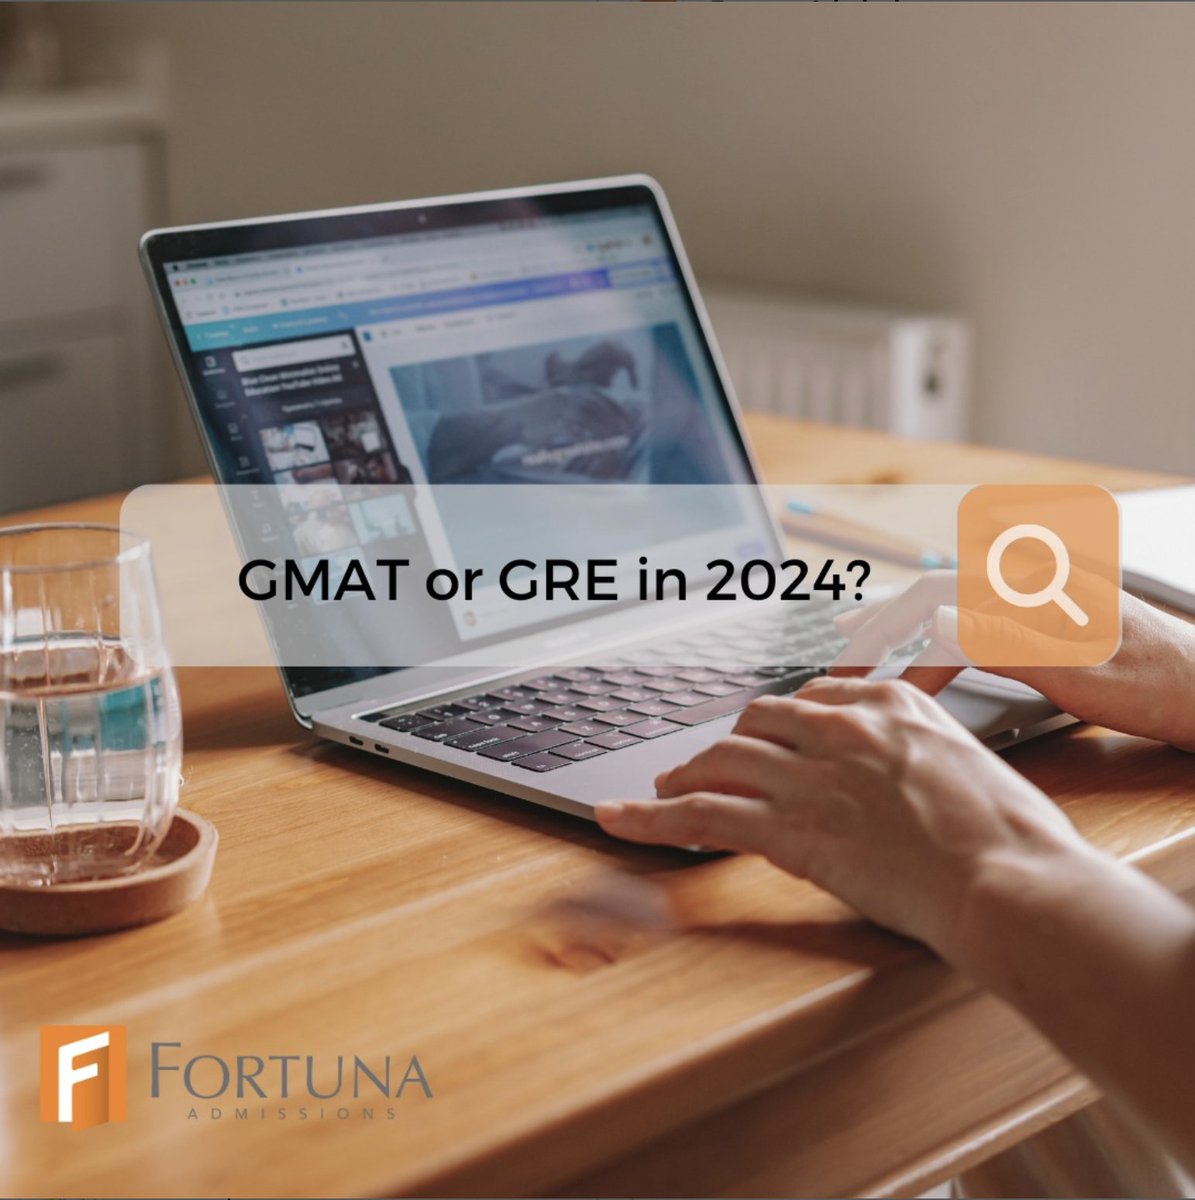 As we continue to set goals for 2024, we see many: 'This is the year I'll write the GMAT.' But is the GMAT or GRE the best for you? To help you determine, read this article by Rachel Erickson Hee outlining the differences between the two.
ow.ly/hQhK50QpbCk 

@fortunaadmit